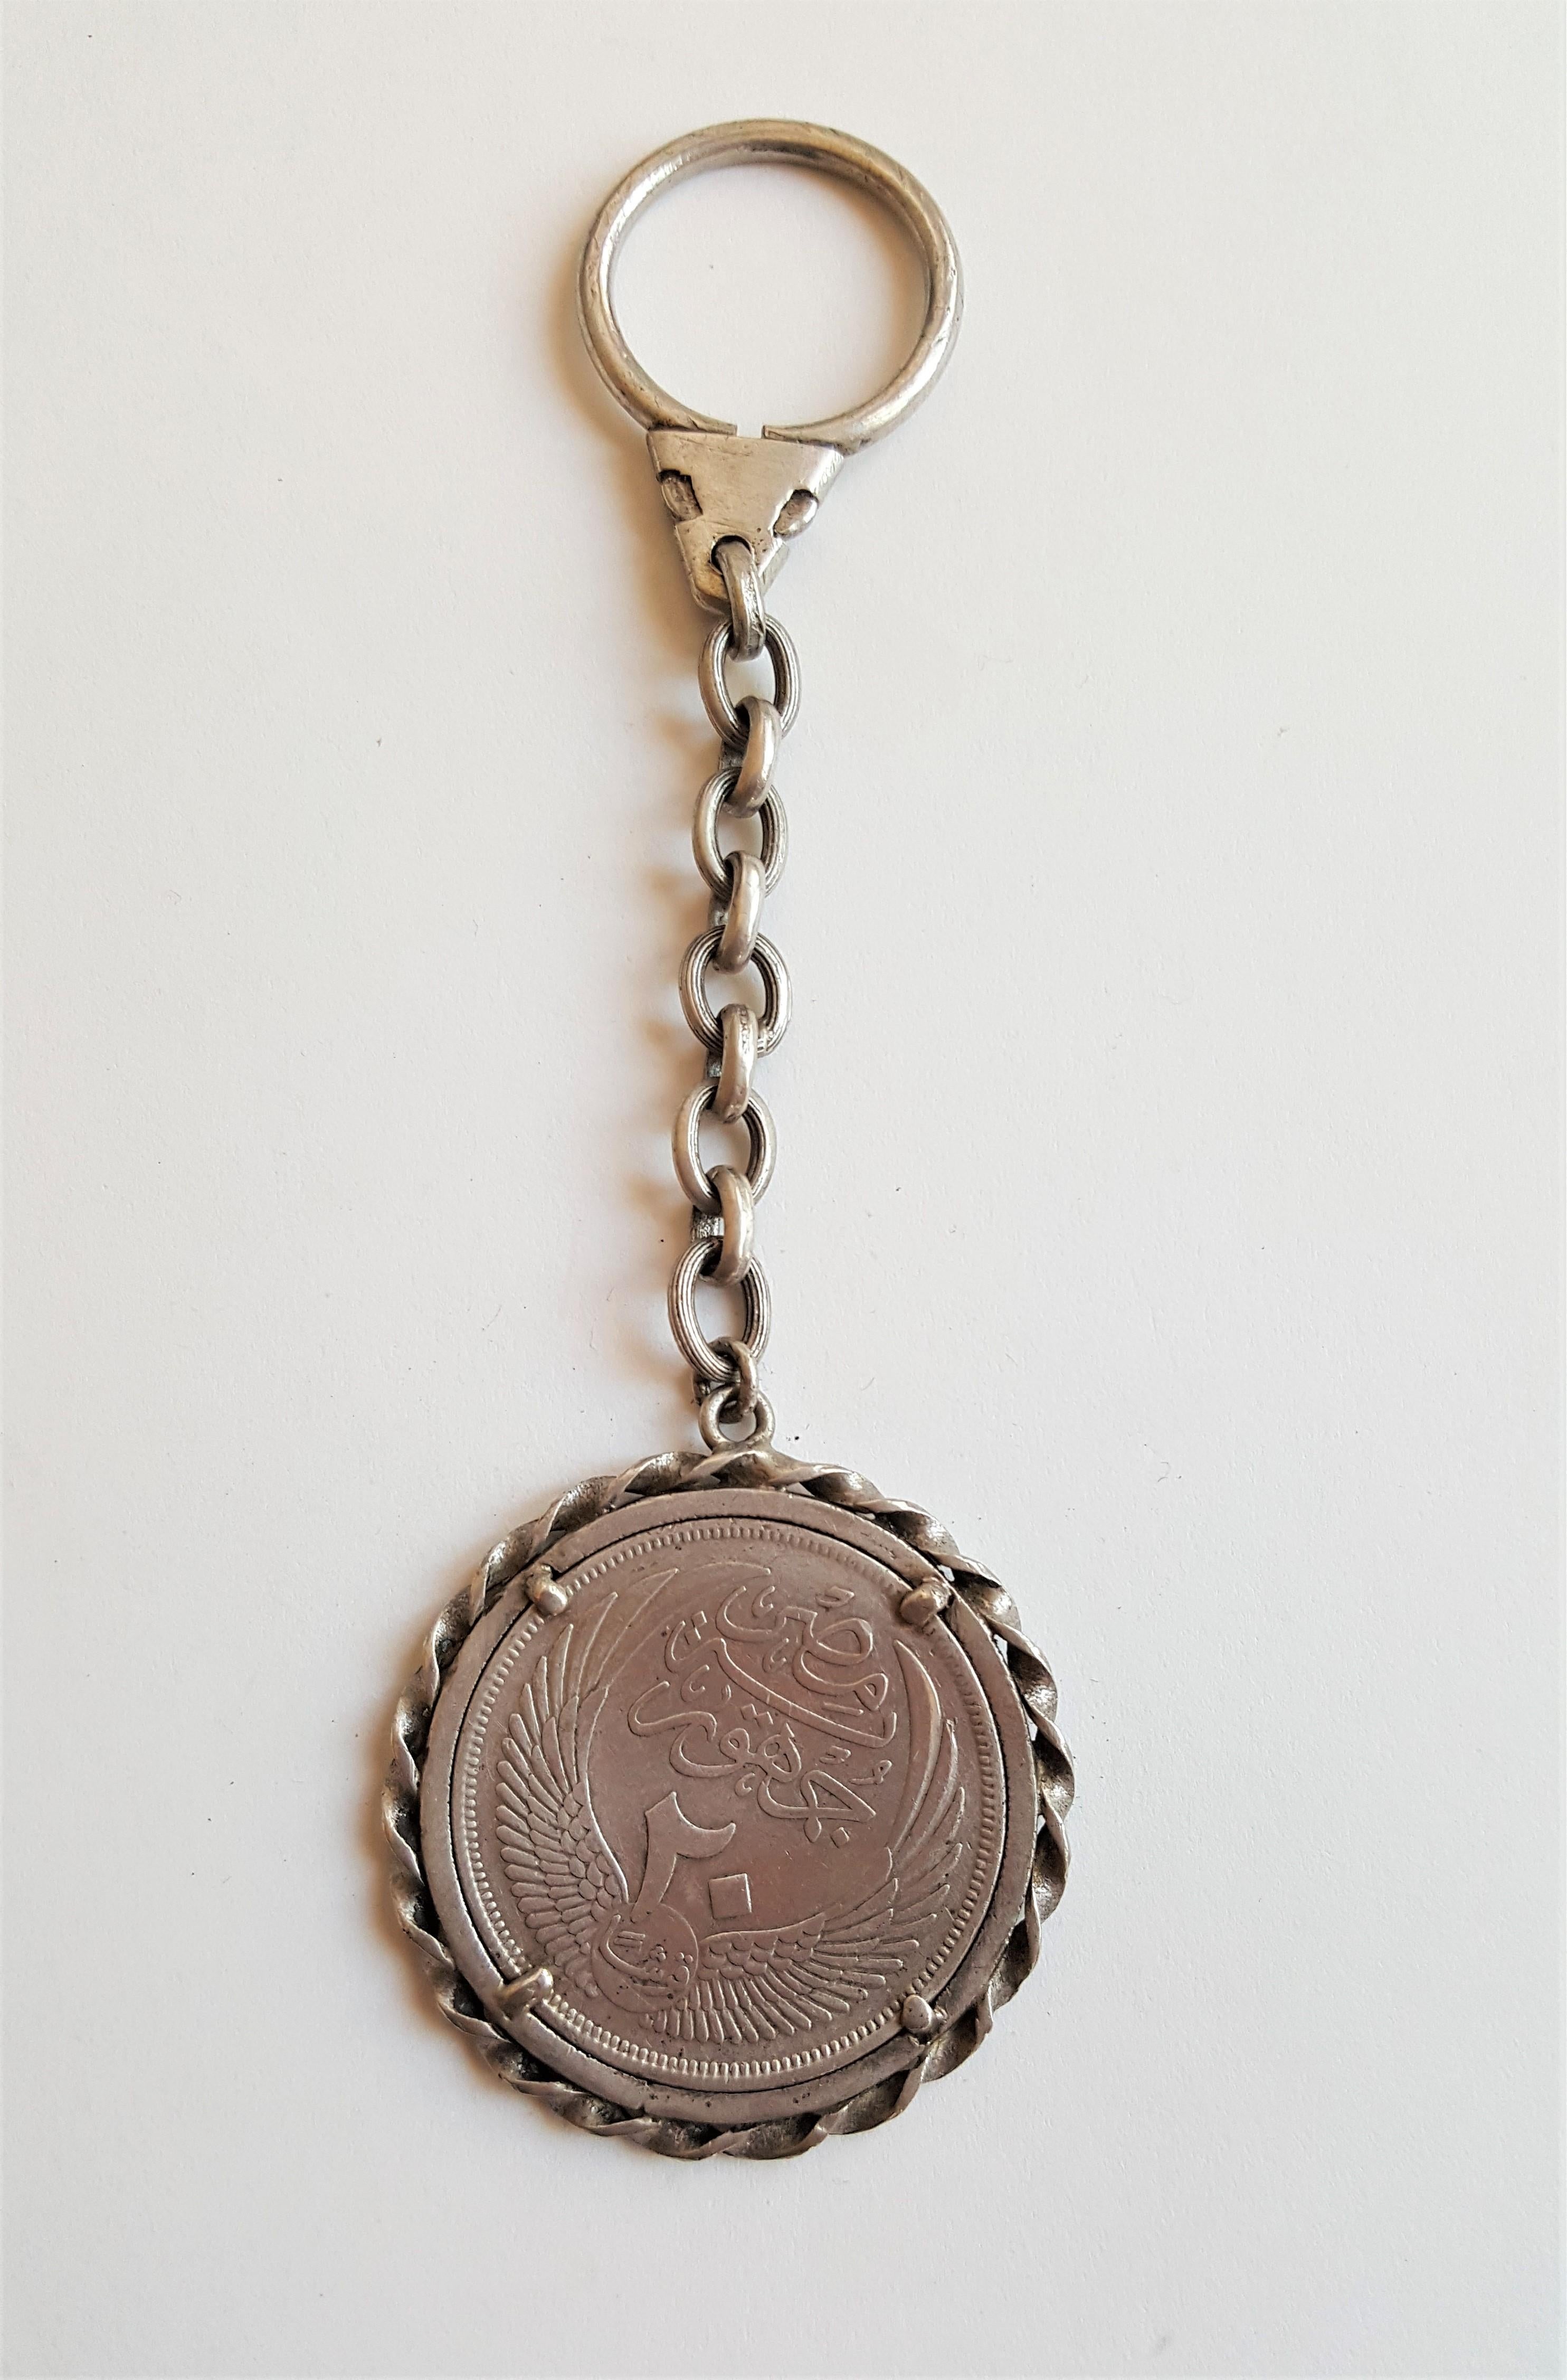 Unique silver keychain with a twisted bezel holding an Egyptian 1956 20 Piastres Silver Coin. The diameter is 40mm and the total length is 5 inches. The key chain weighs a total of 29.1 grams. The coin is in very nice condition and would make a nice